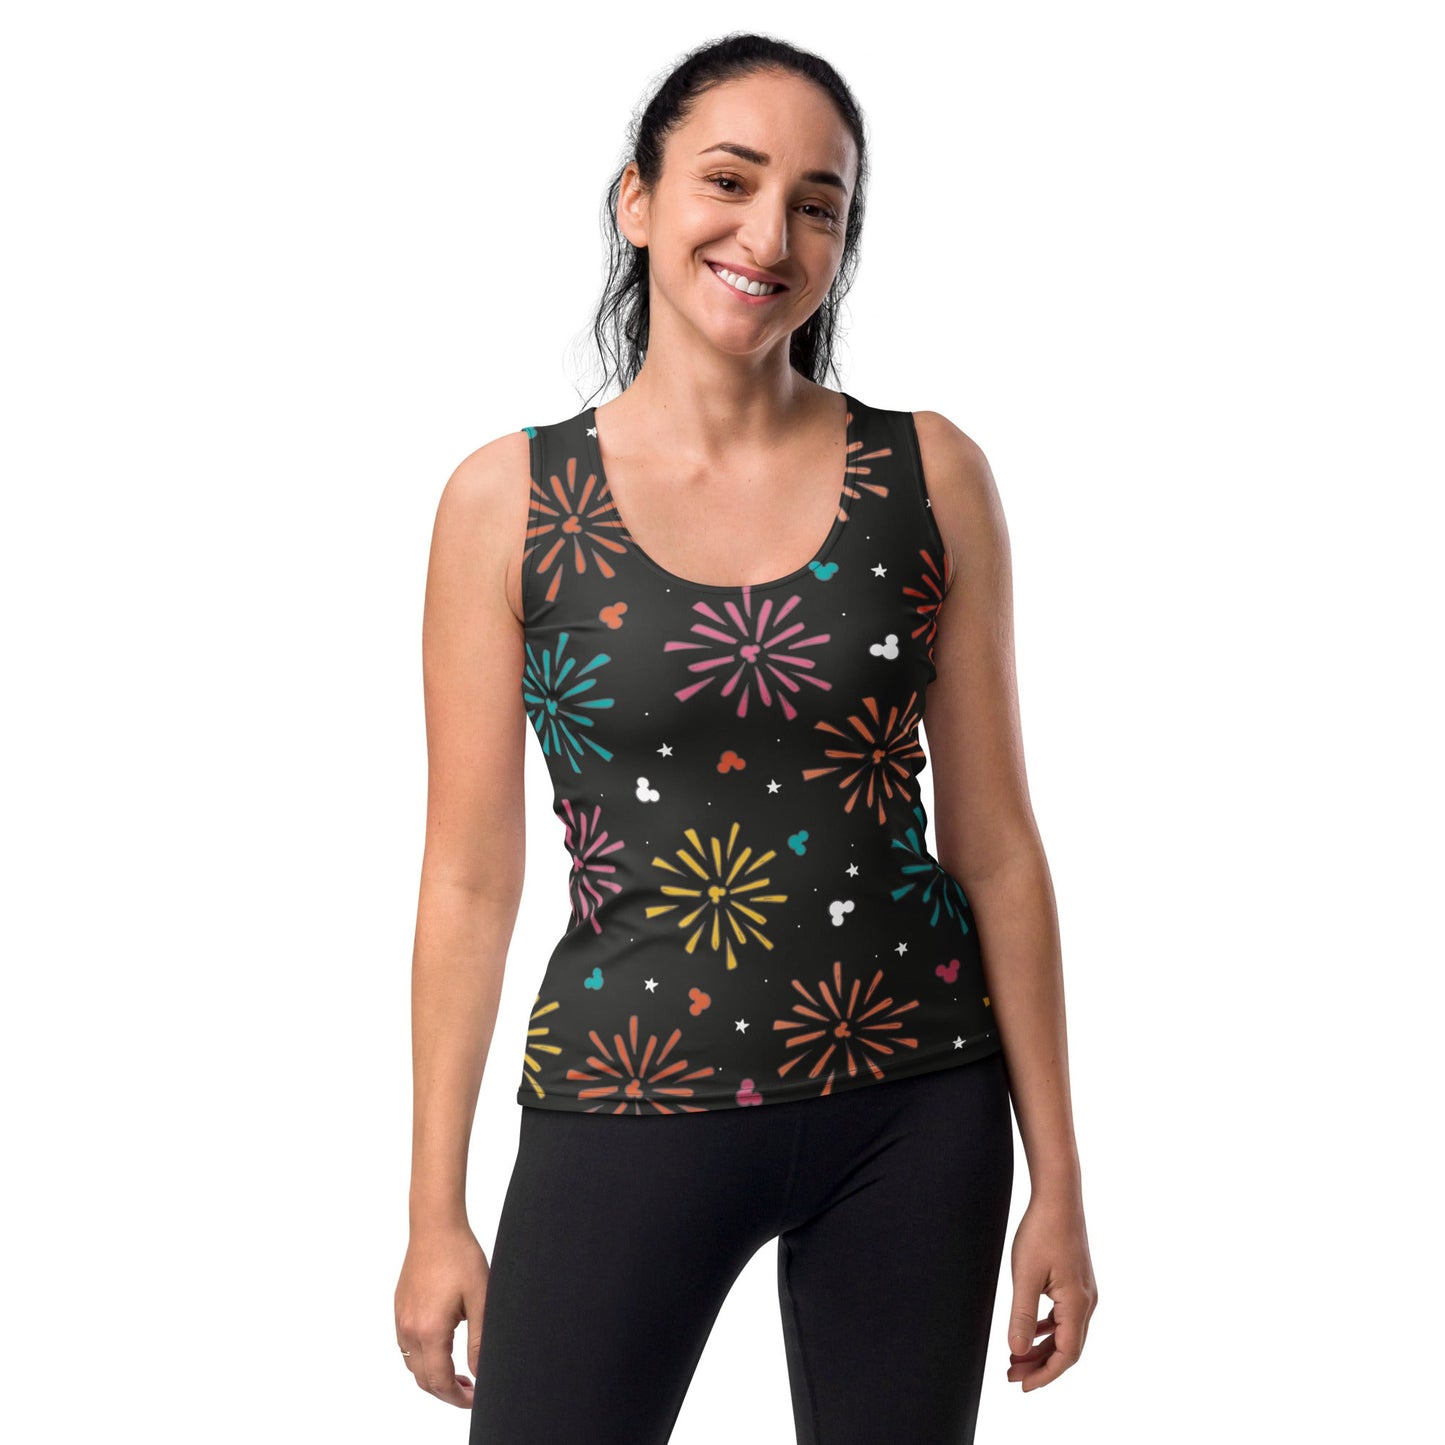 Rainbow Firework Mouse Tank Top athleisureathletic clothingWrong Lever Clothing